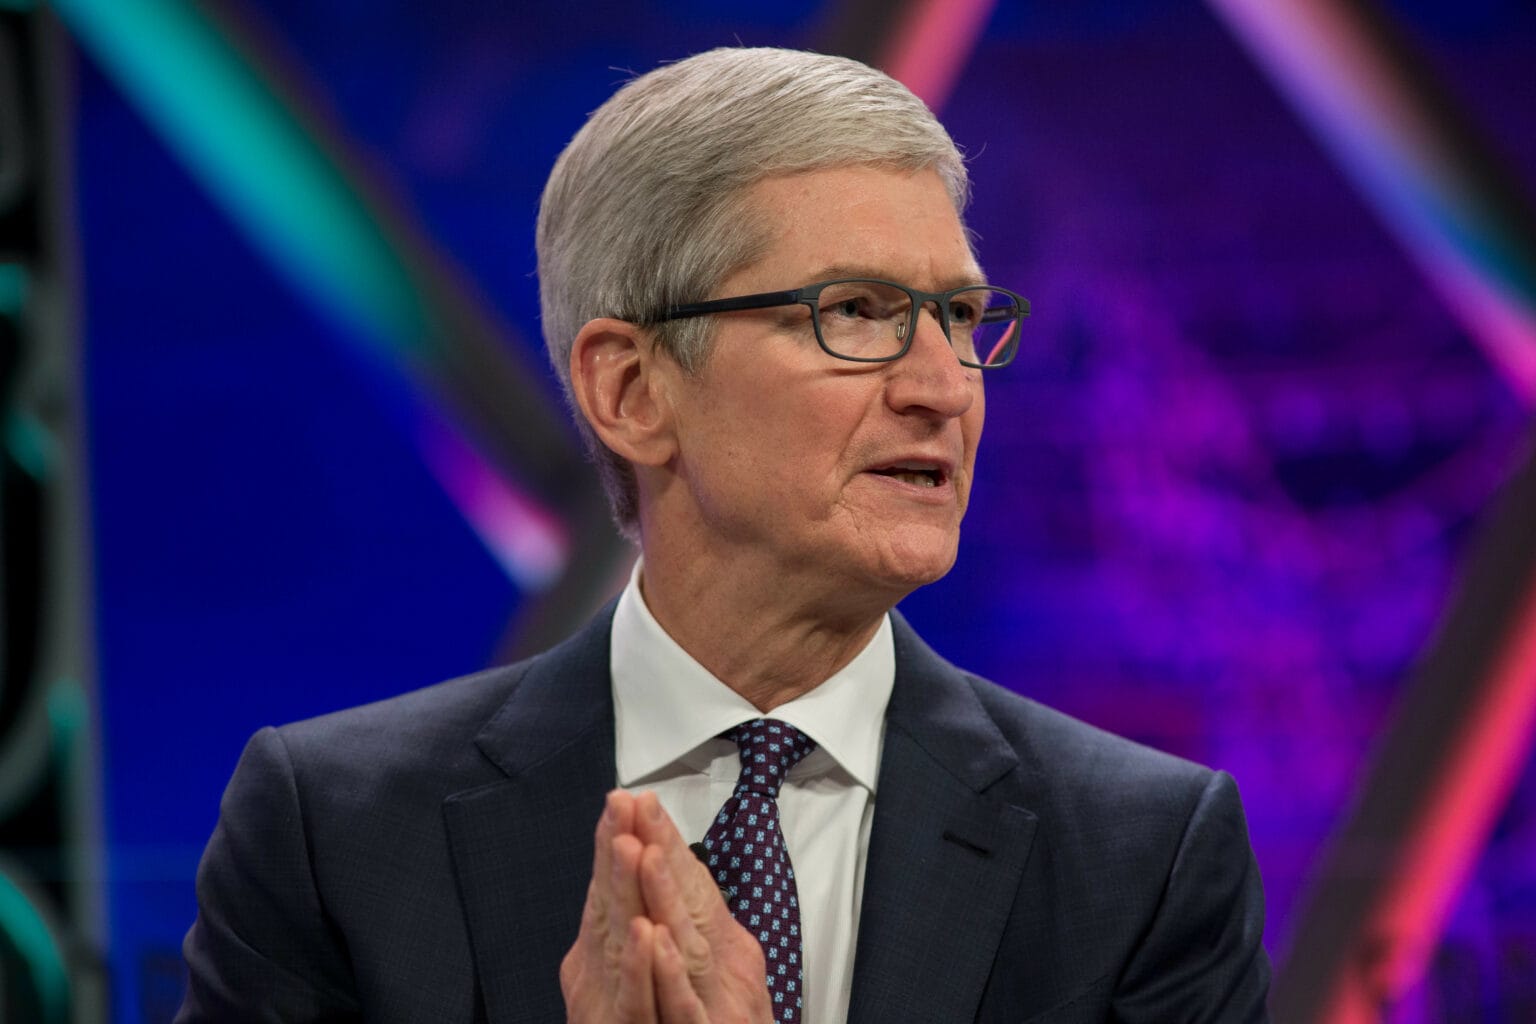 Tim Cook's secret China investment deal: The agreement is said to have helped settle tensions with Chinese authorities.